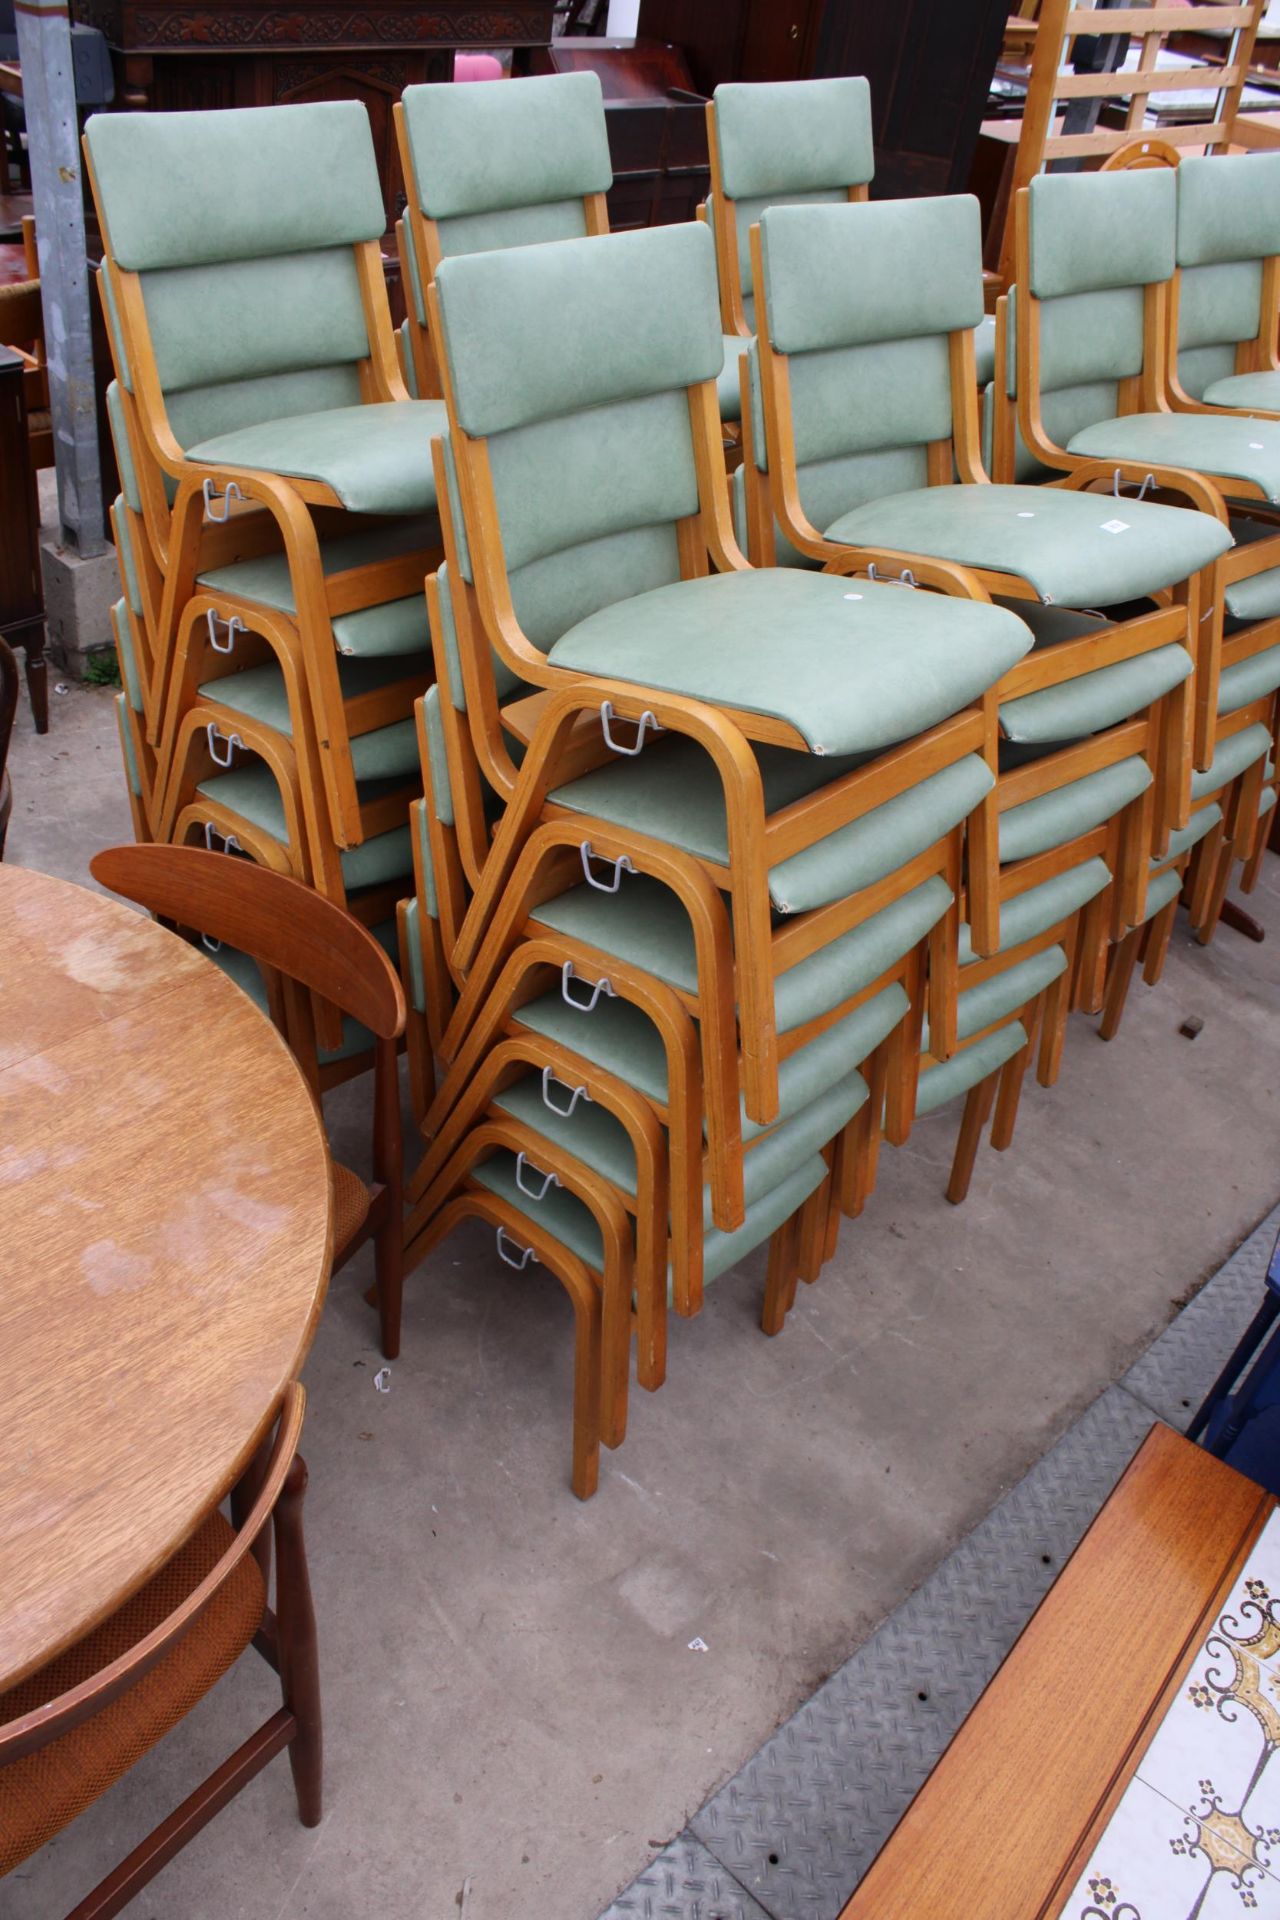 TWENTY FOUR MODERN BENTWOOD STACKING CHAIRS